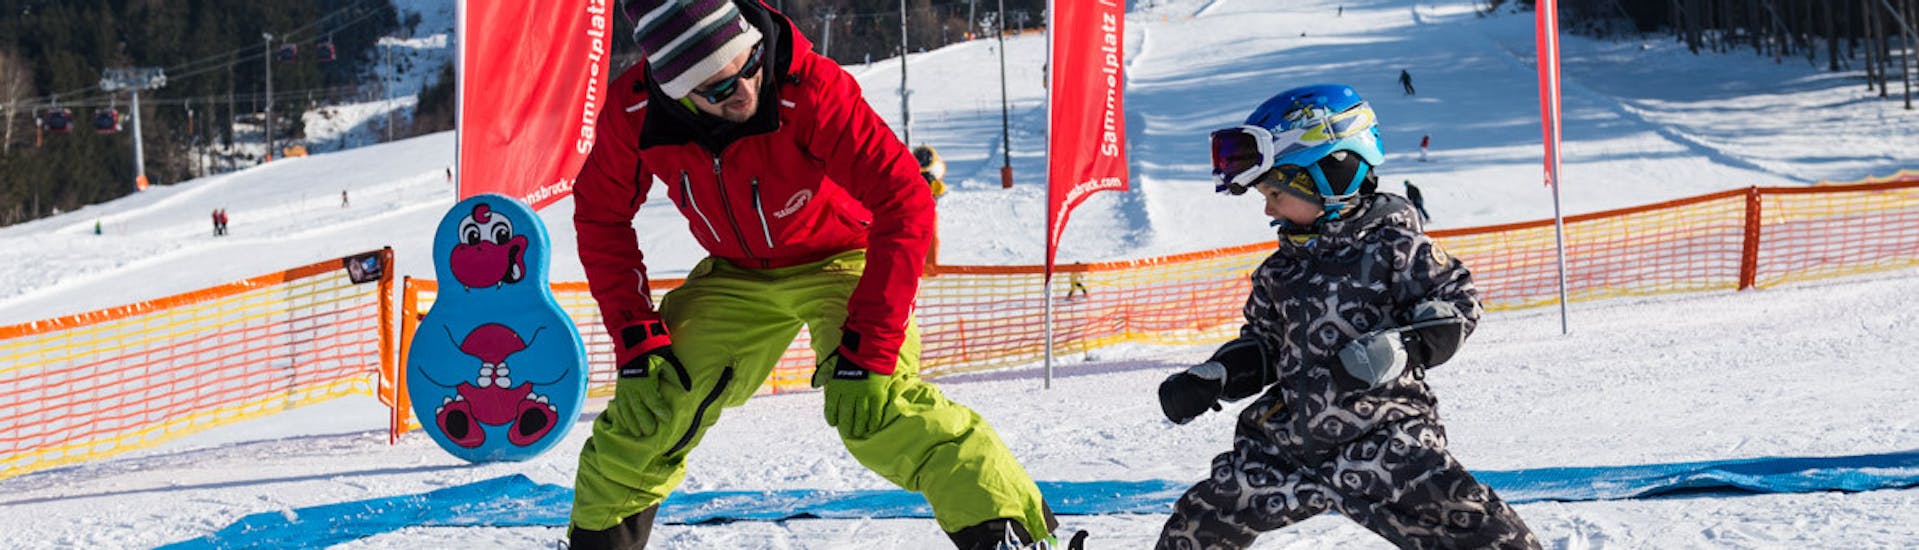 Private Ski Lessons for Kids with Experience from Ski- & Snowboardschule Innsbruck.